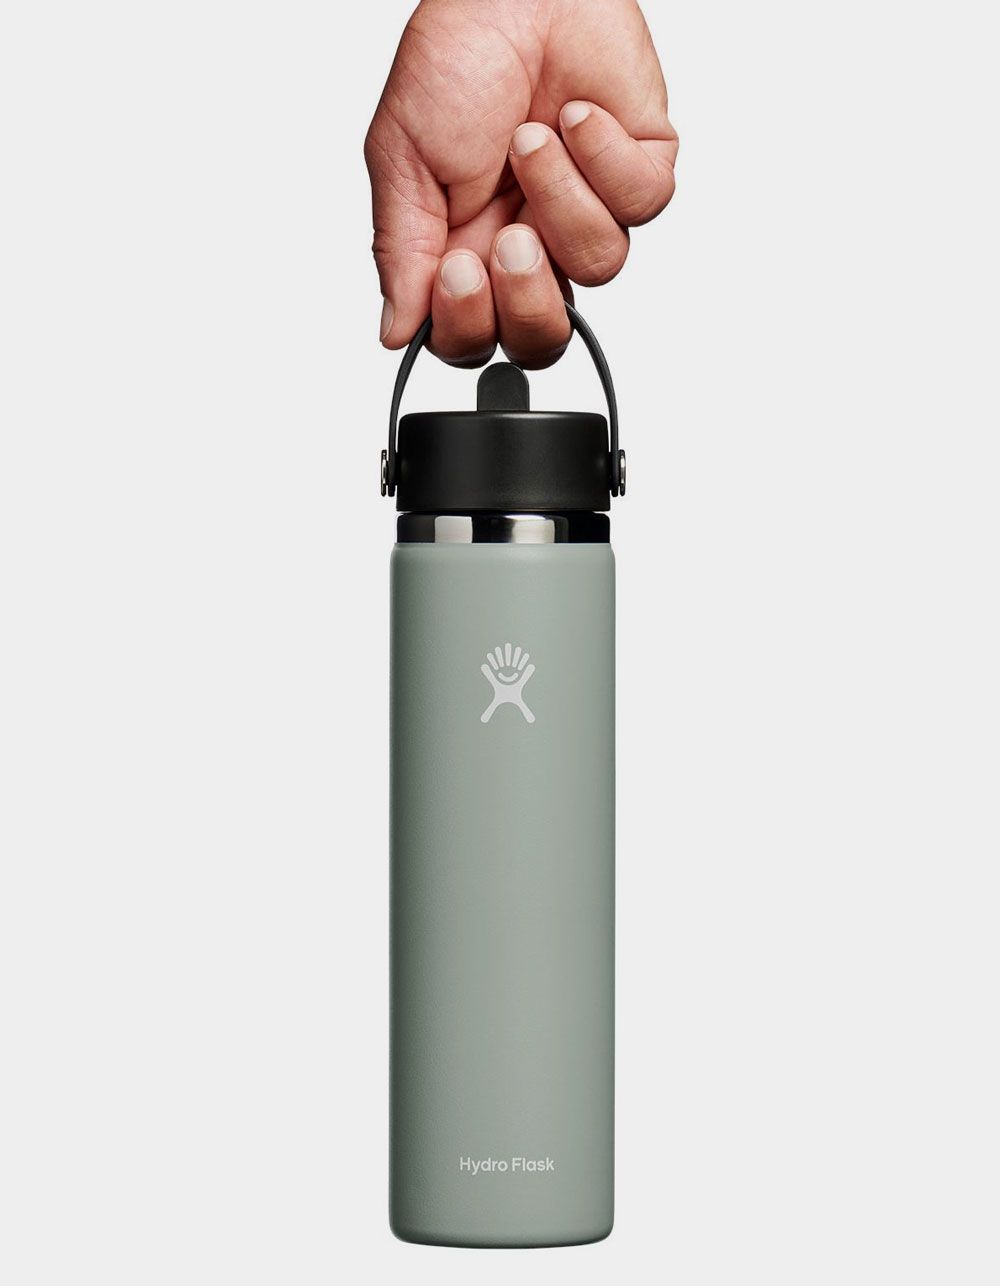 Save up to 50% off Hydro Flask tumblers that keep drinks cold for 24 hours